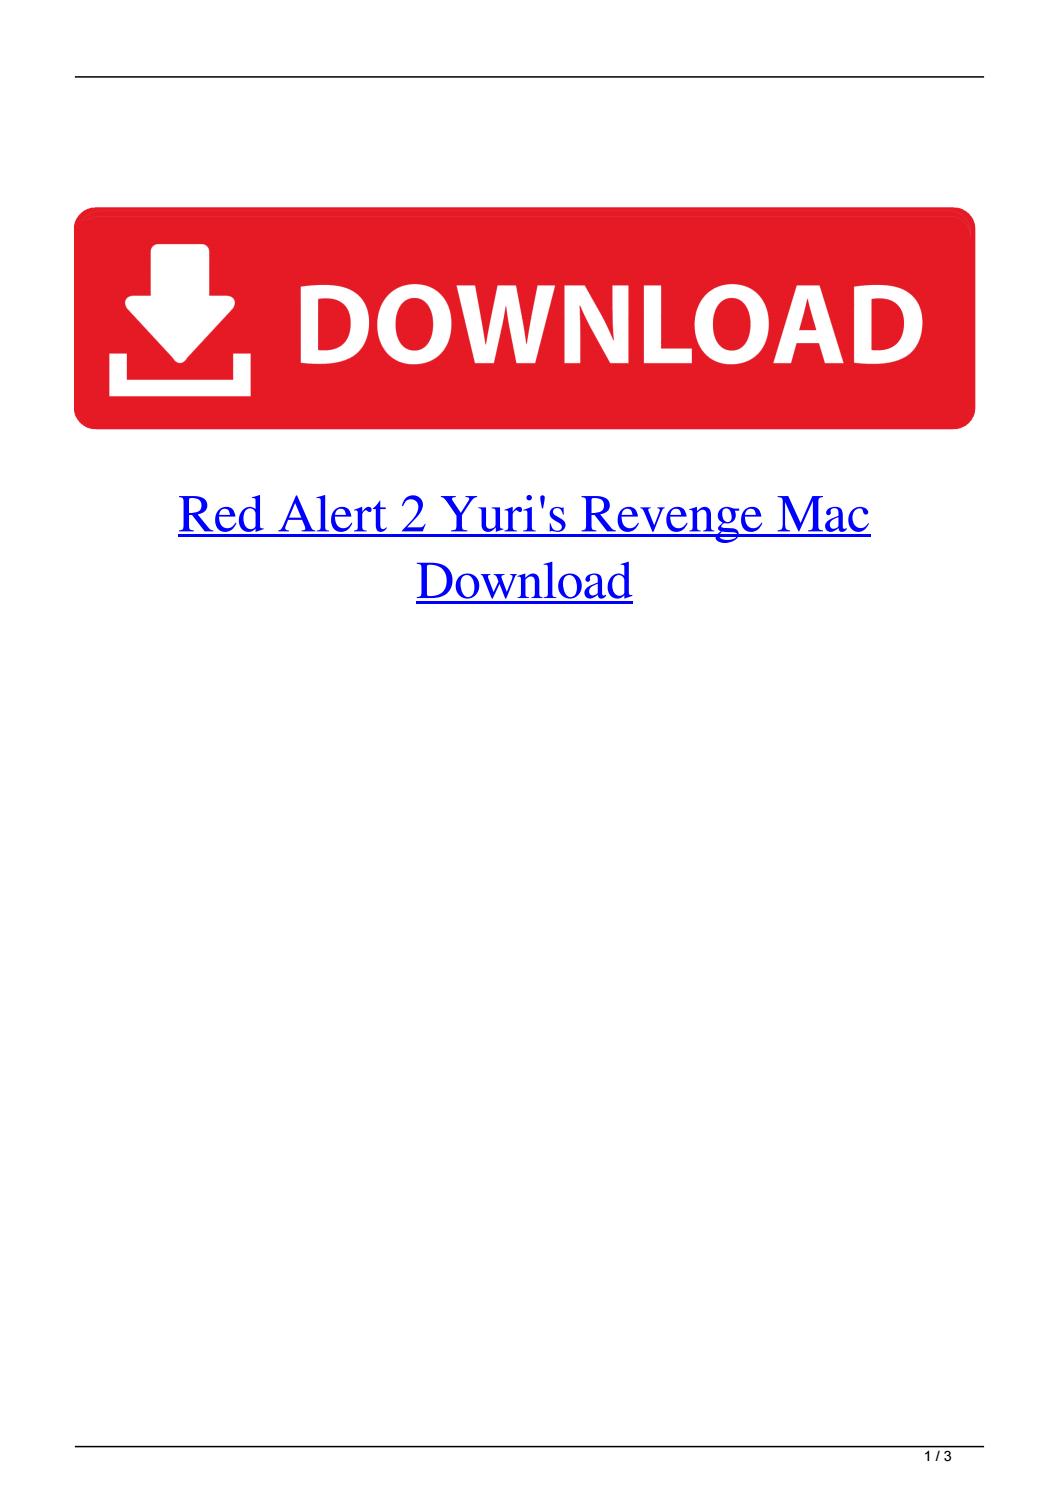 Red Alert download the new version for iphone